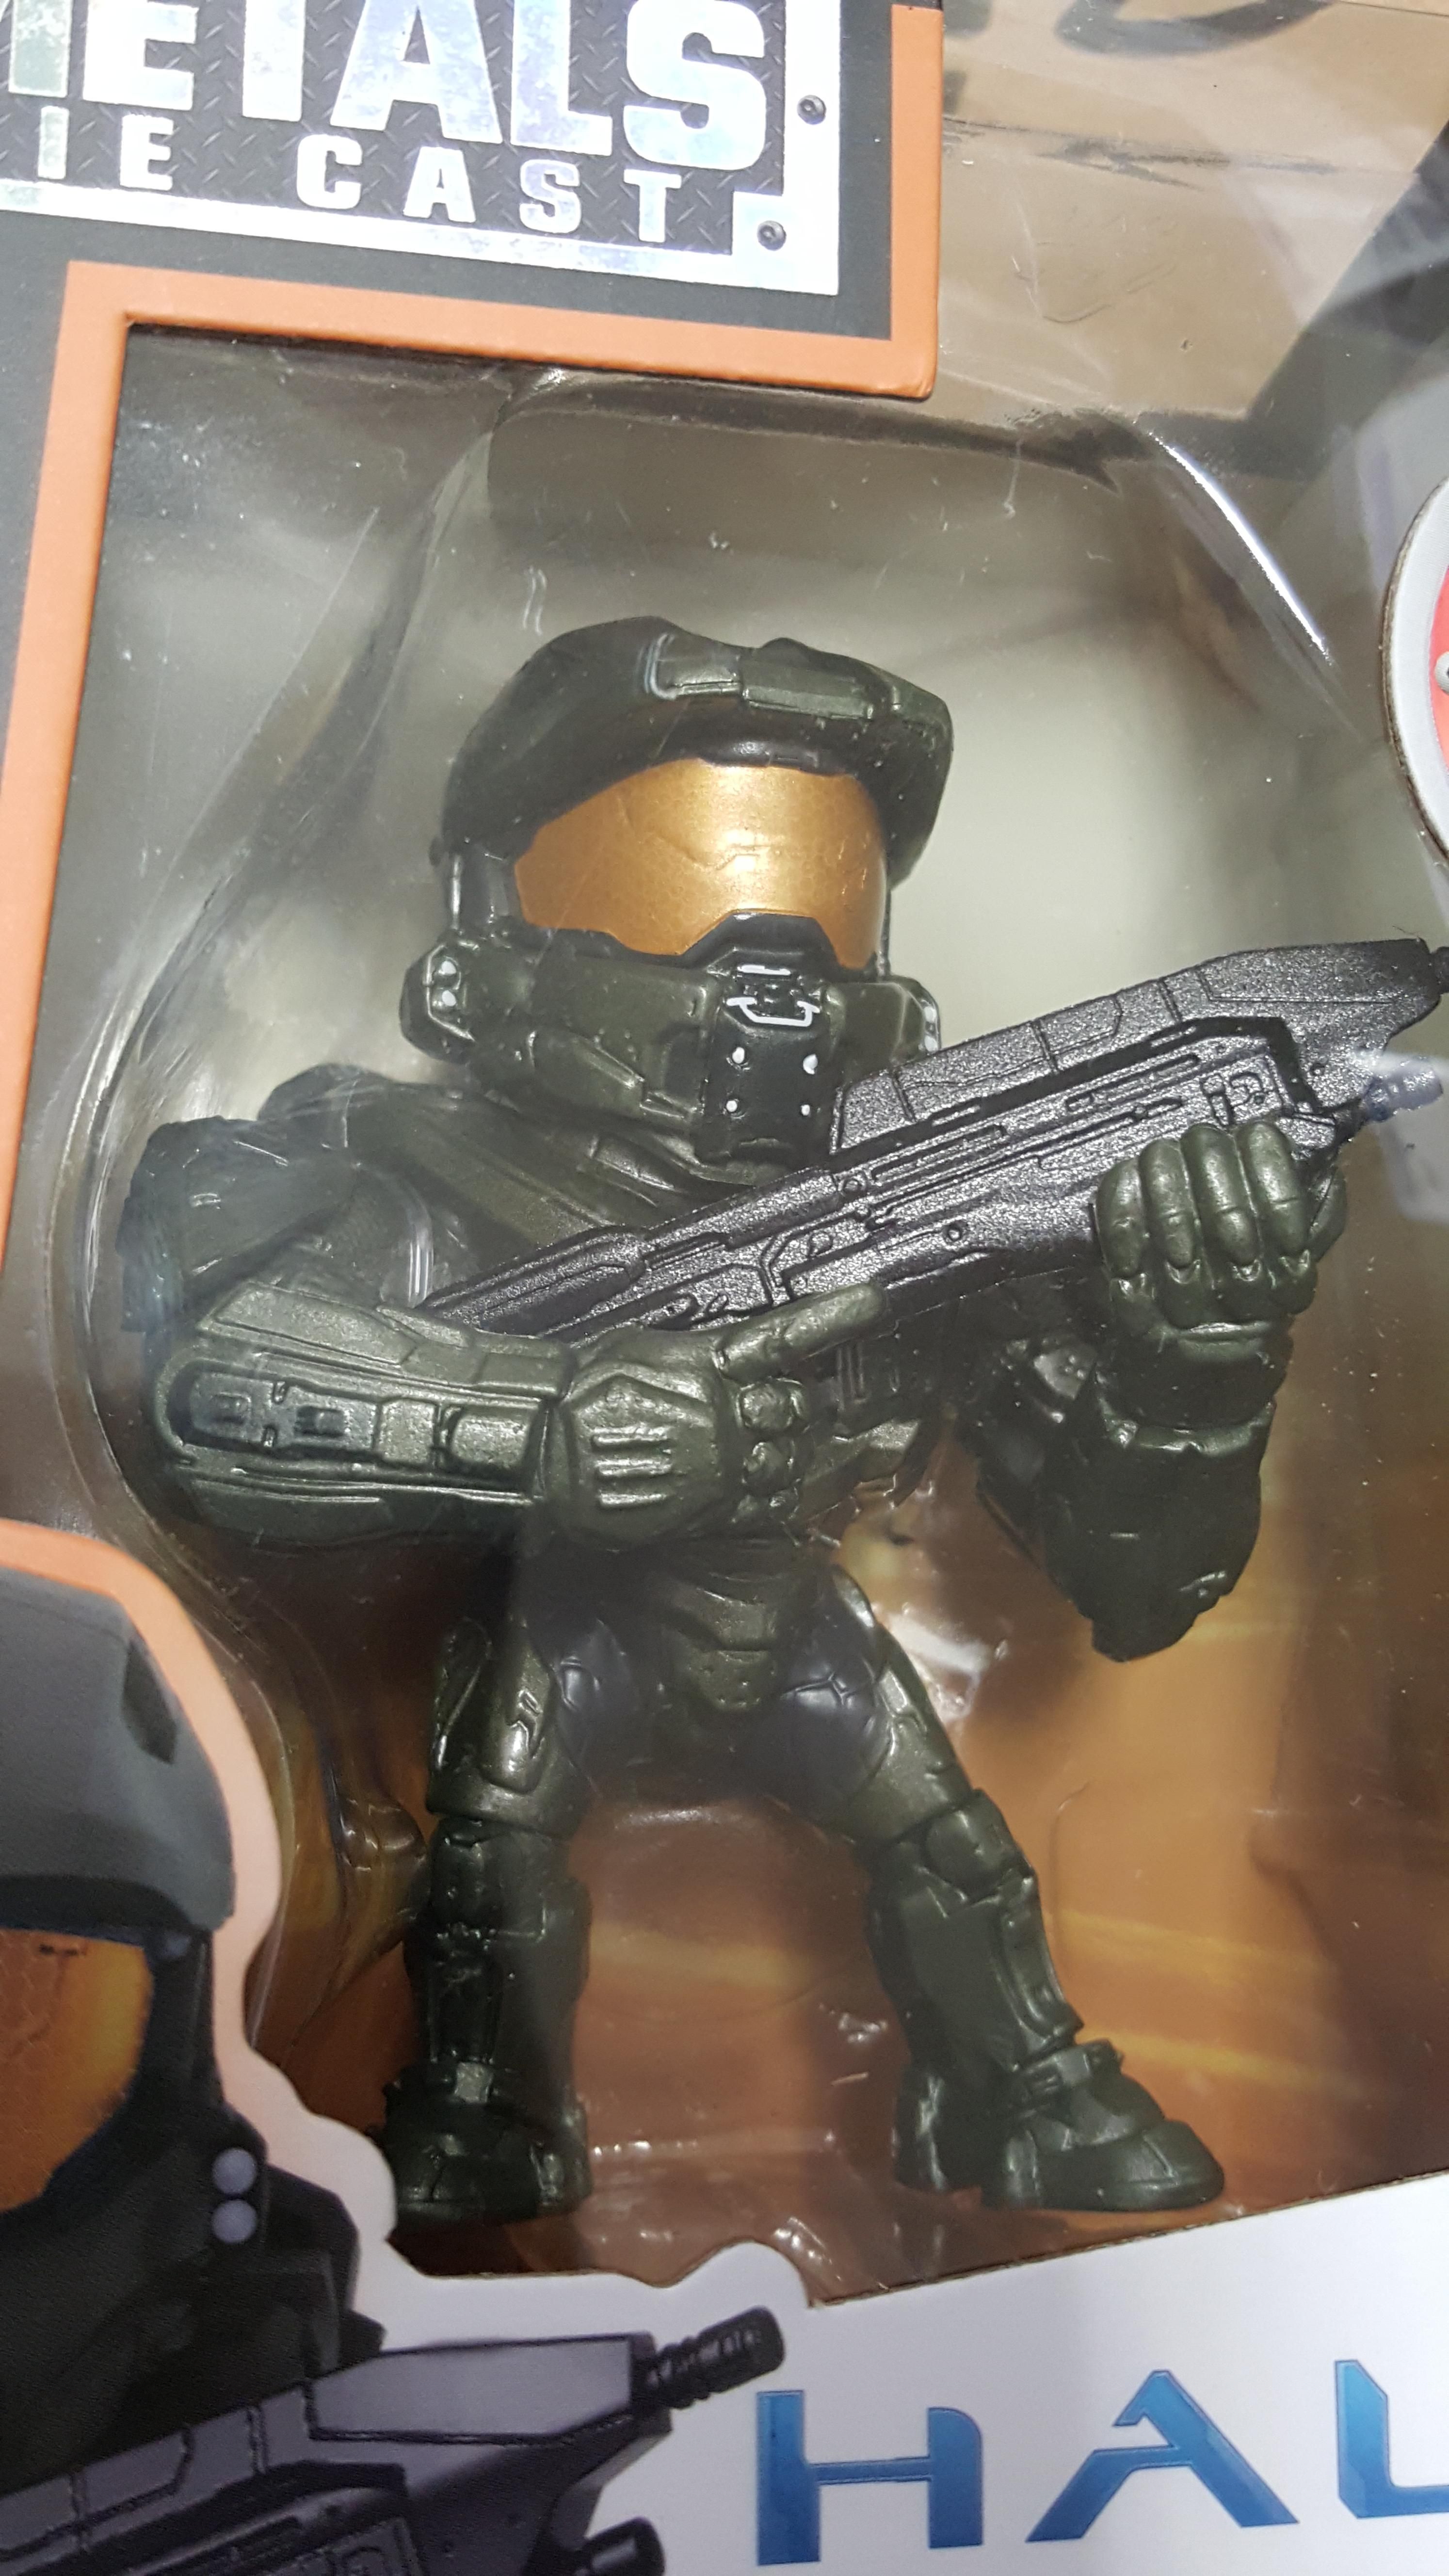 Looks like Master Chief's been skipping leg day